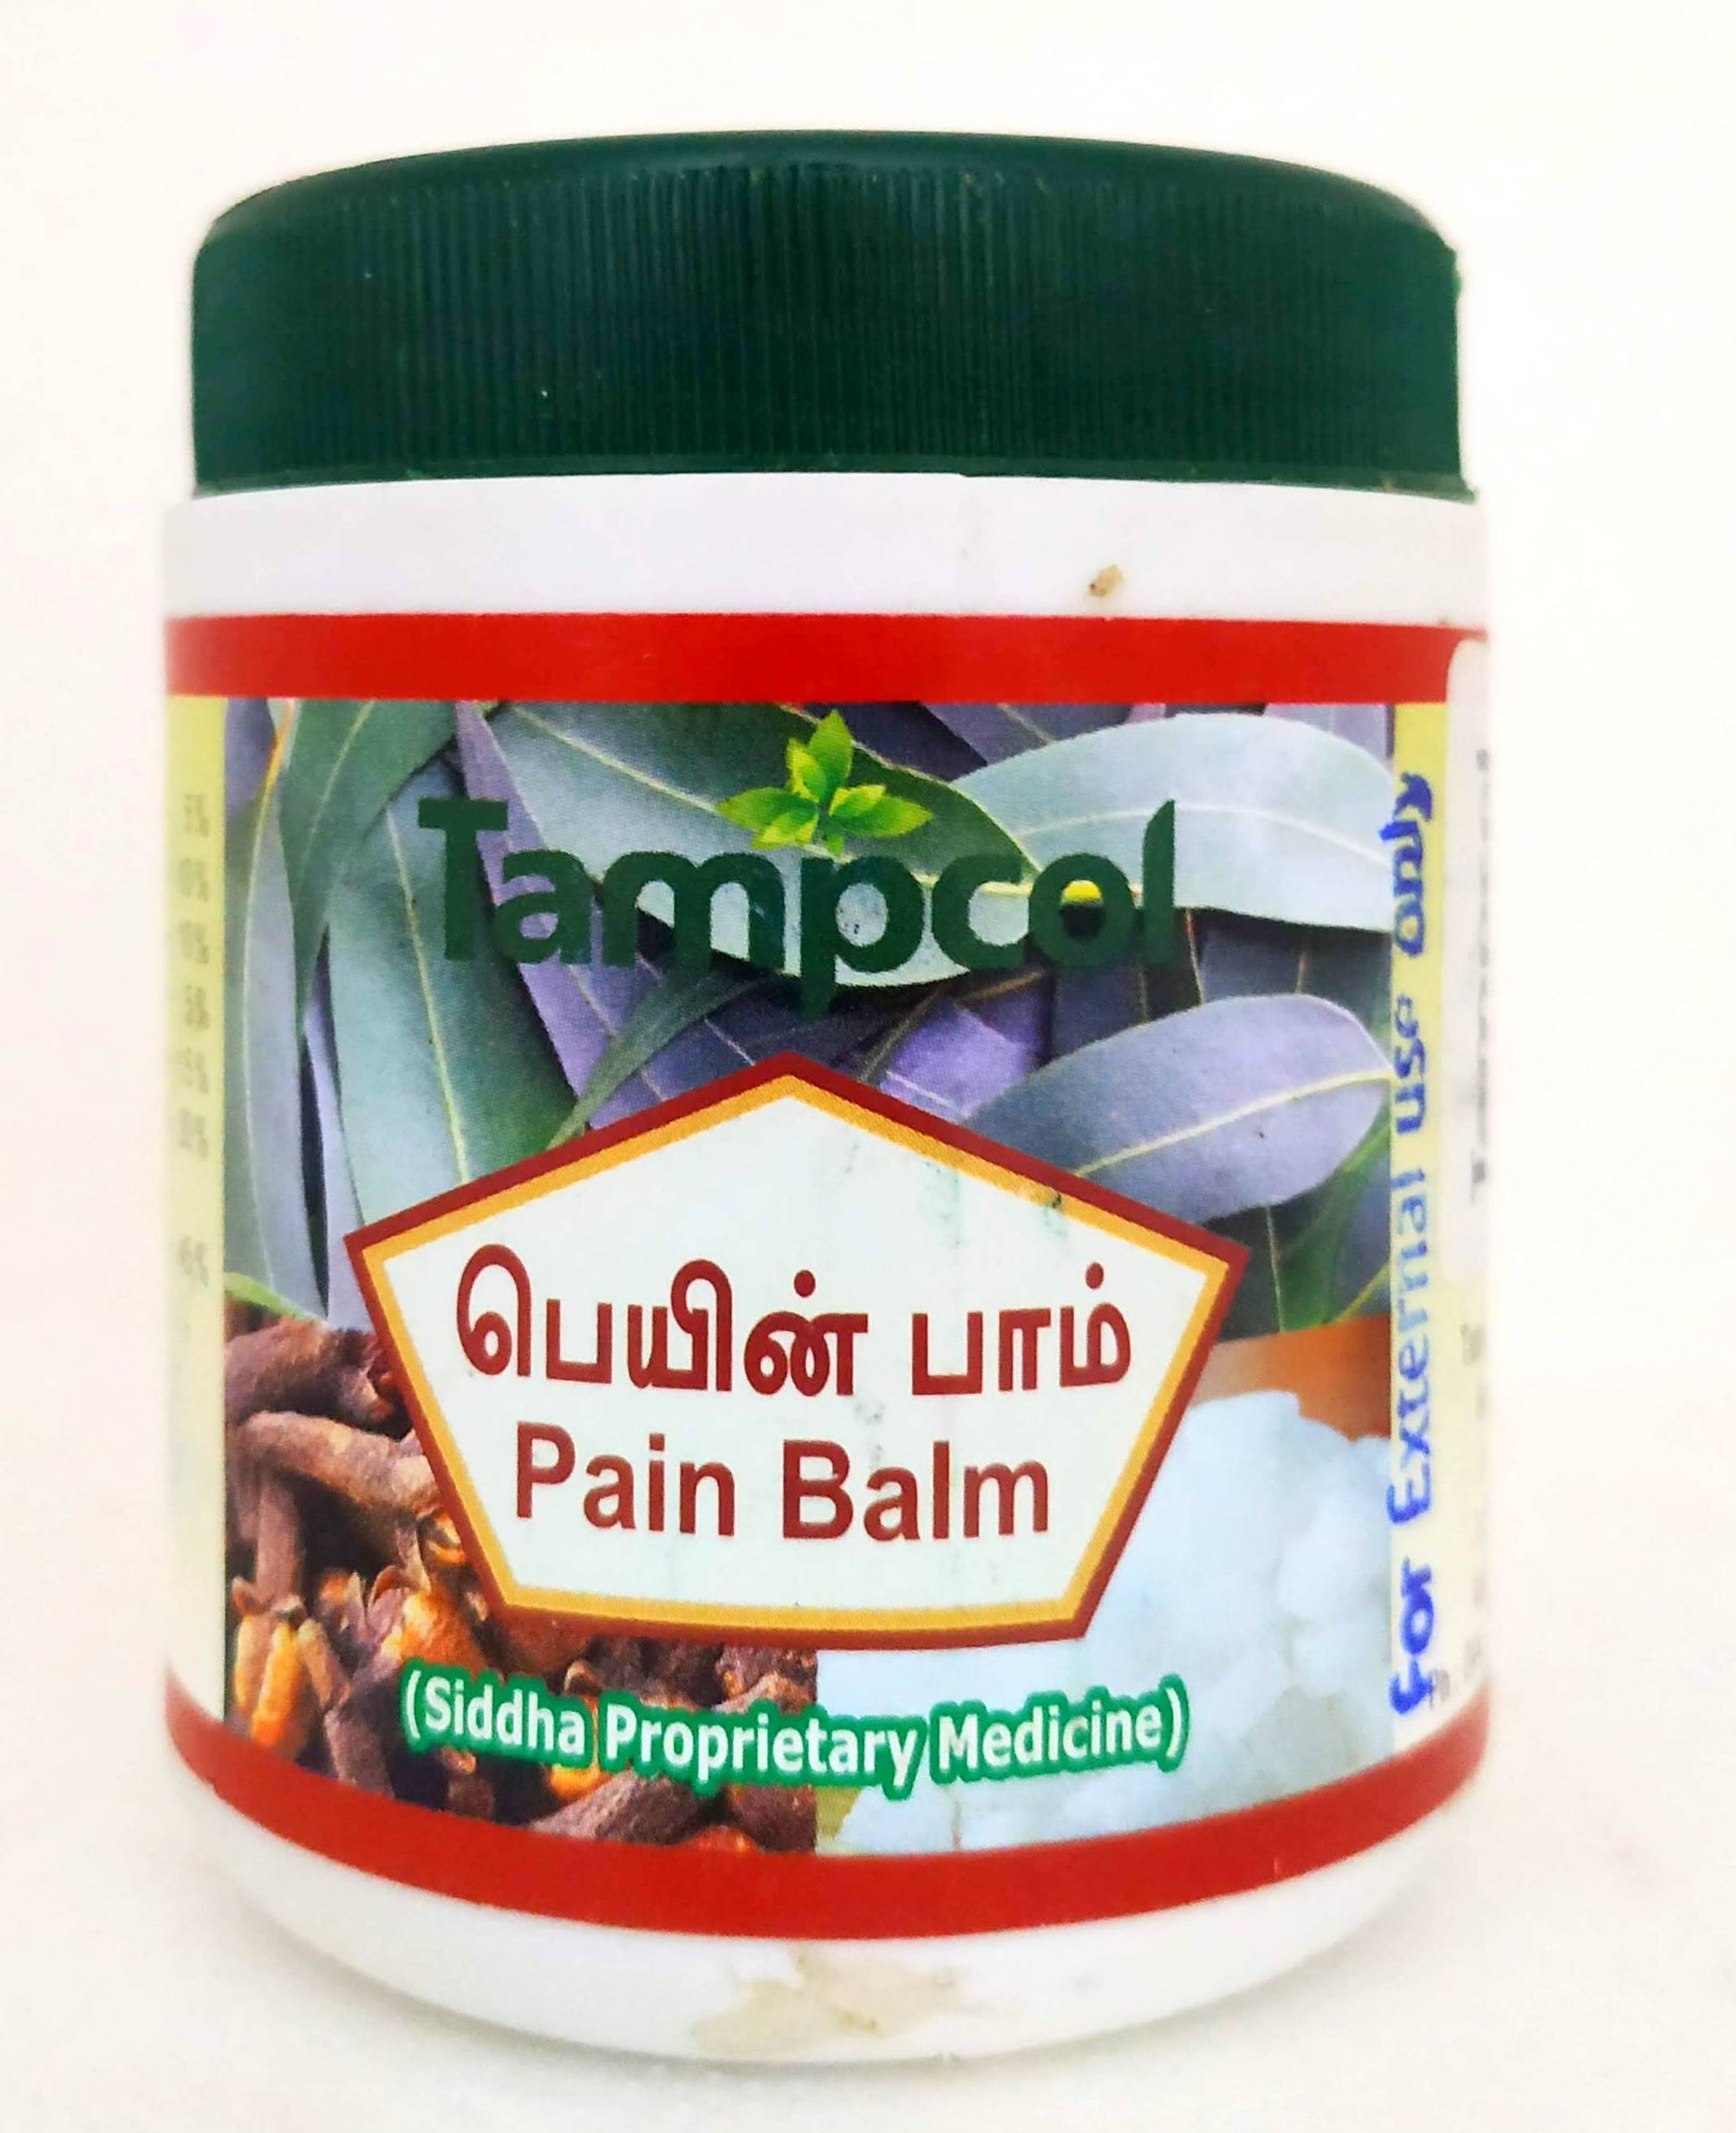 Shop Tampcol Pain Balm 100gm at price 209.50 from Tampcol Online - Ayush Care